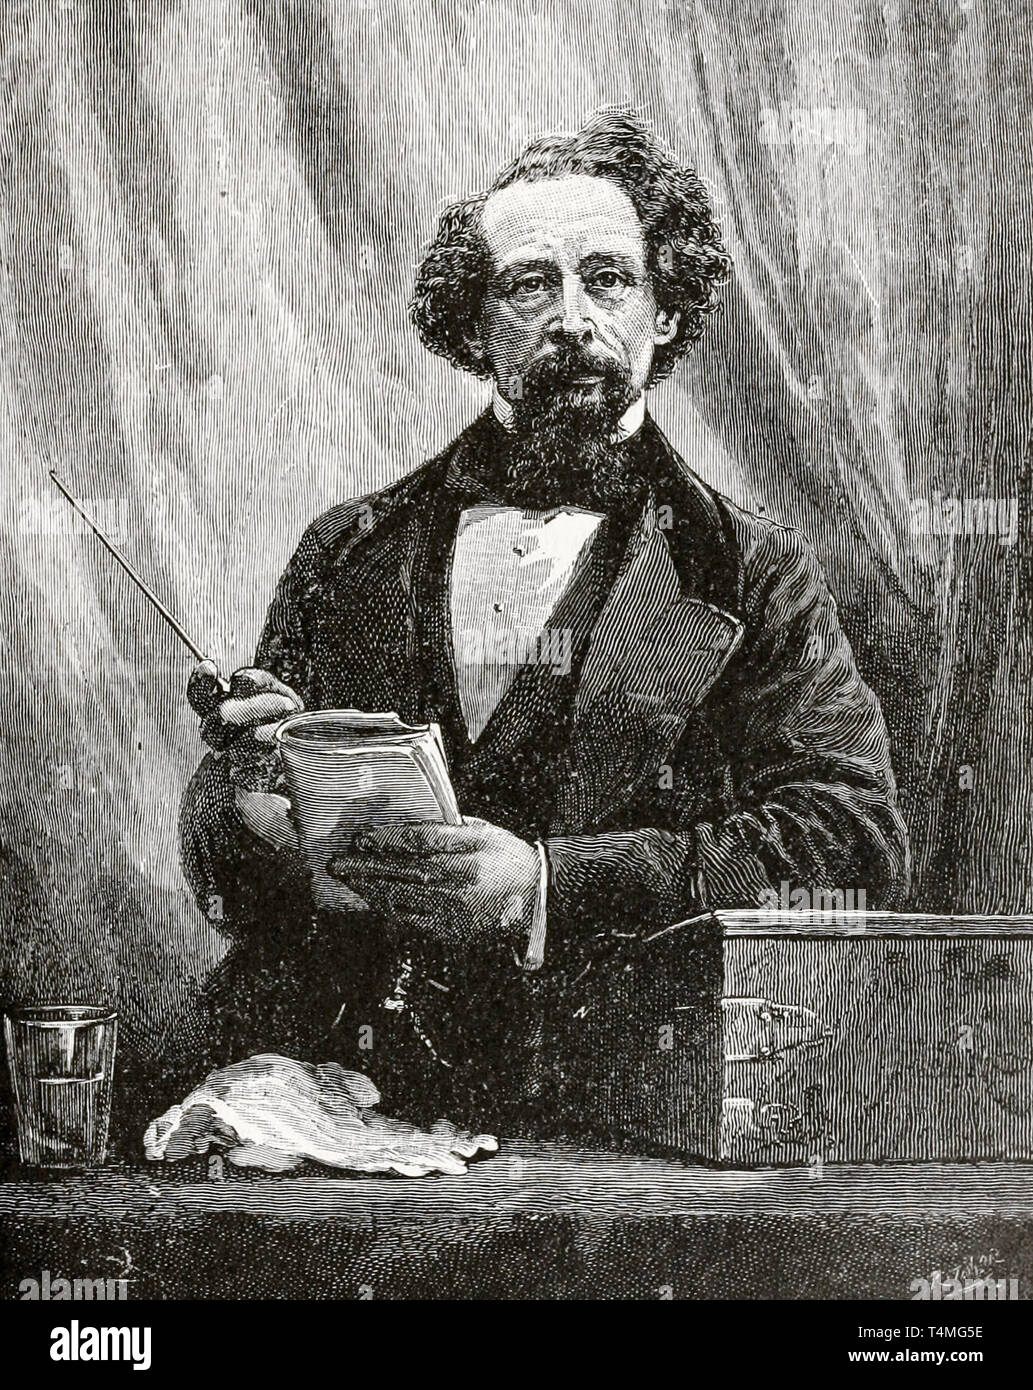 Charles Dickens (1812-1870), portrait engraving, 1892 Stock Photo